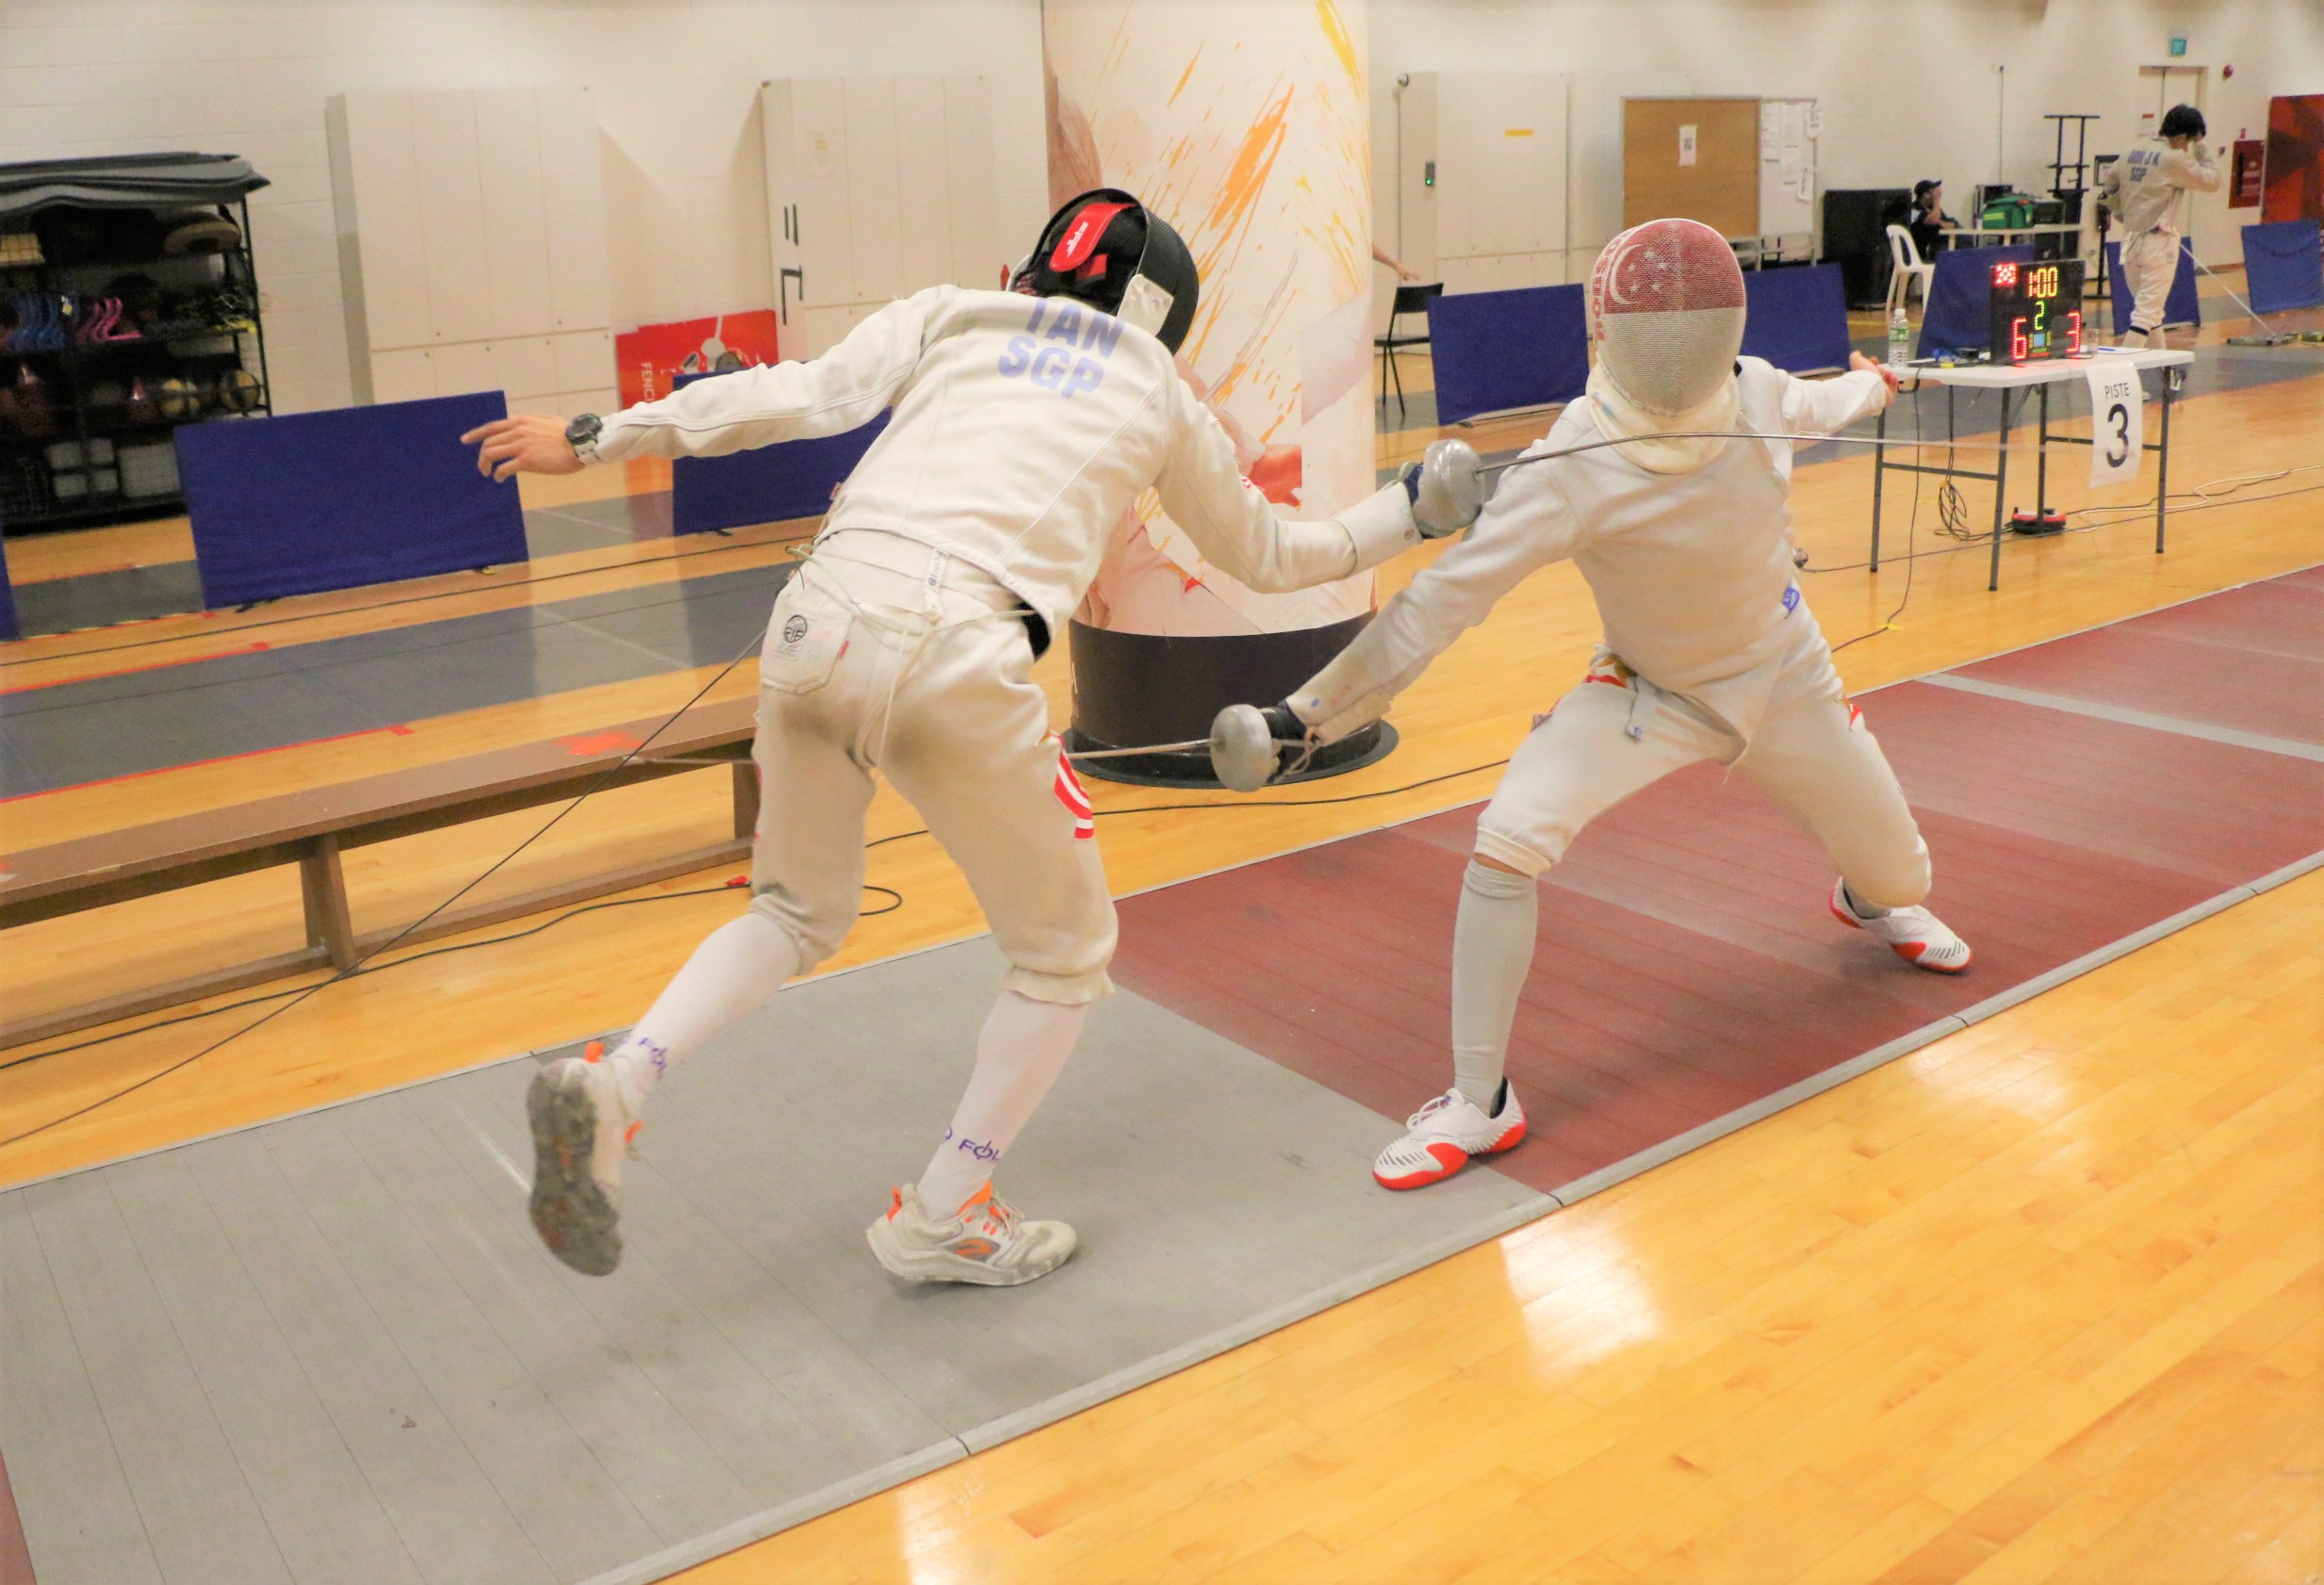 NSG 2023 Fencing : ACS(I) Samuel Robson scores Gold Medals in A Division Epee & Foil Finals!